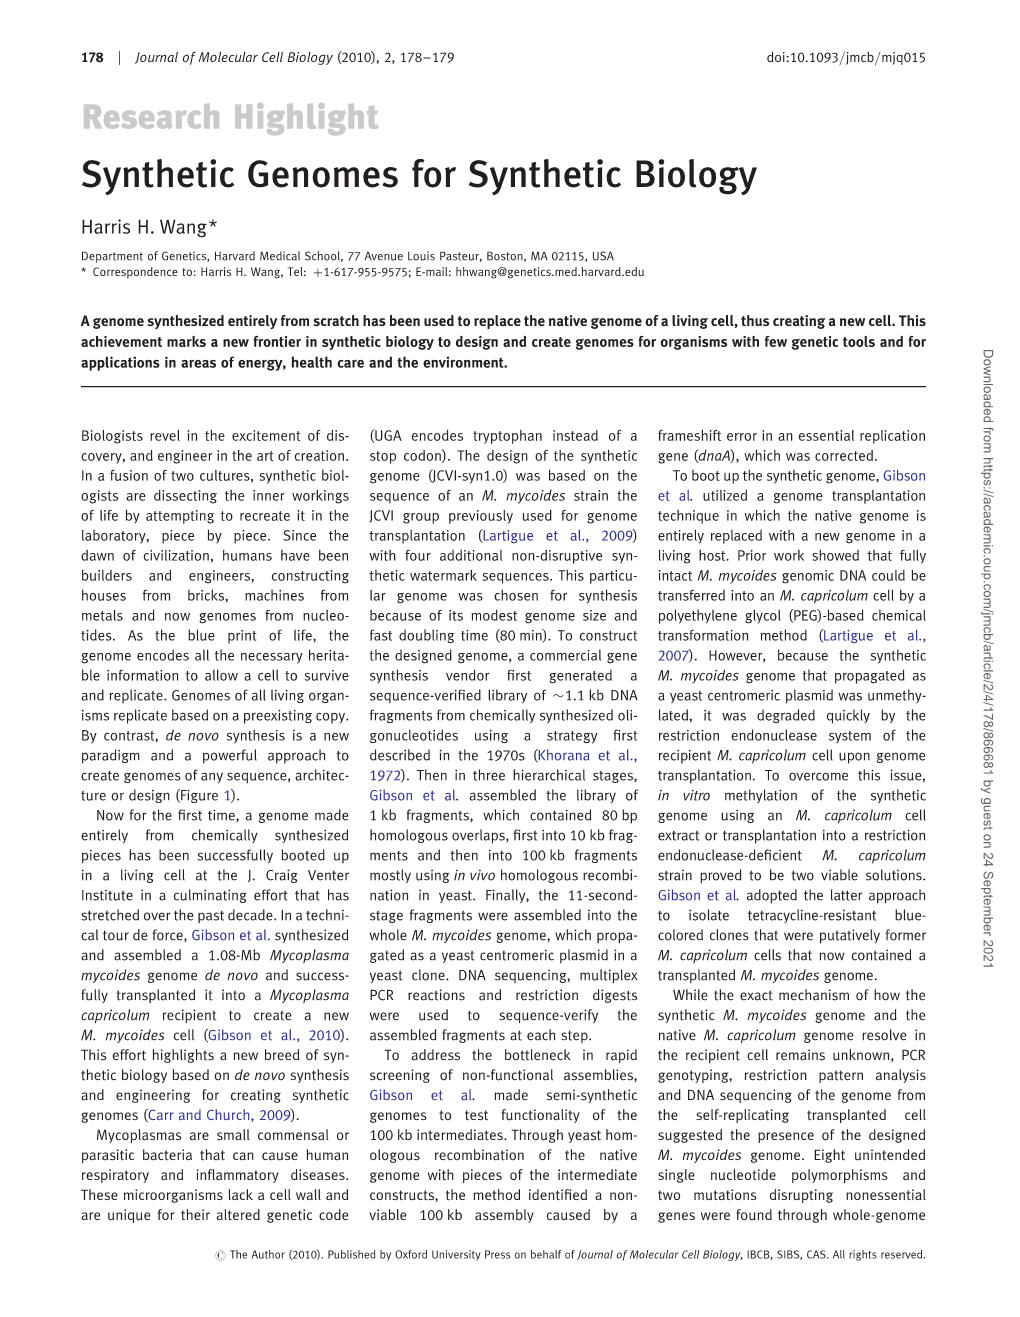 Synthetic Genomes for Synthetic Biology